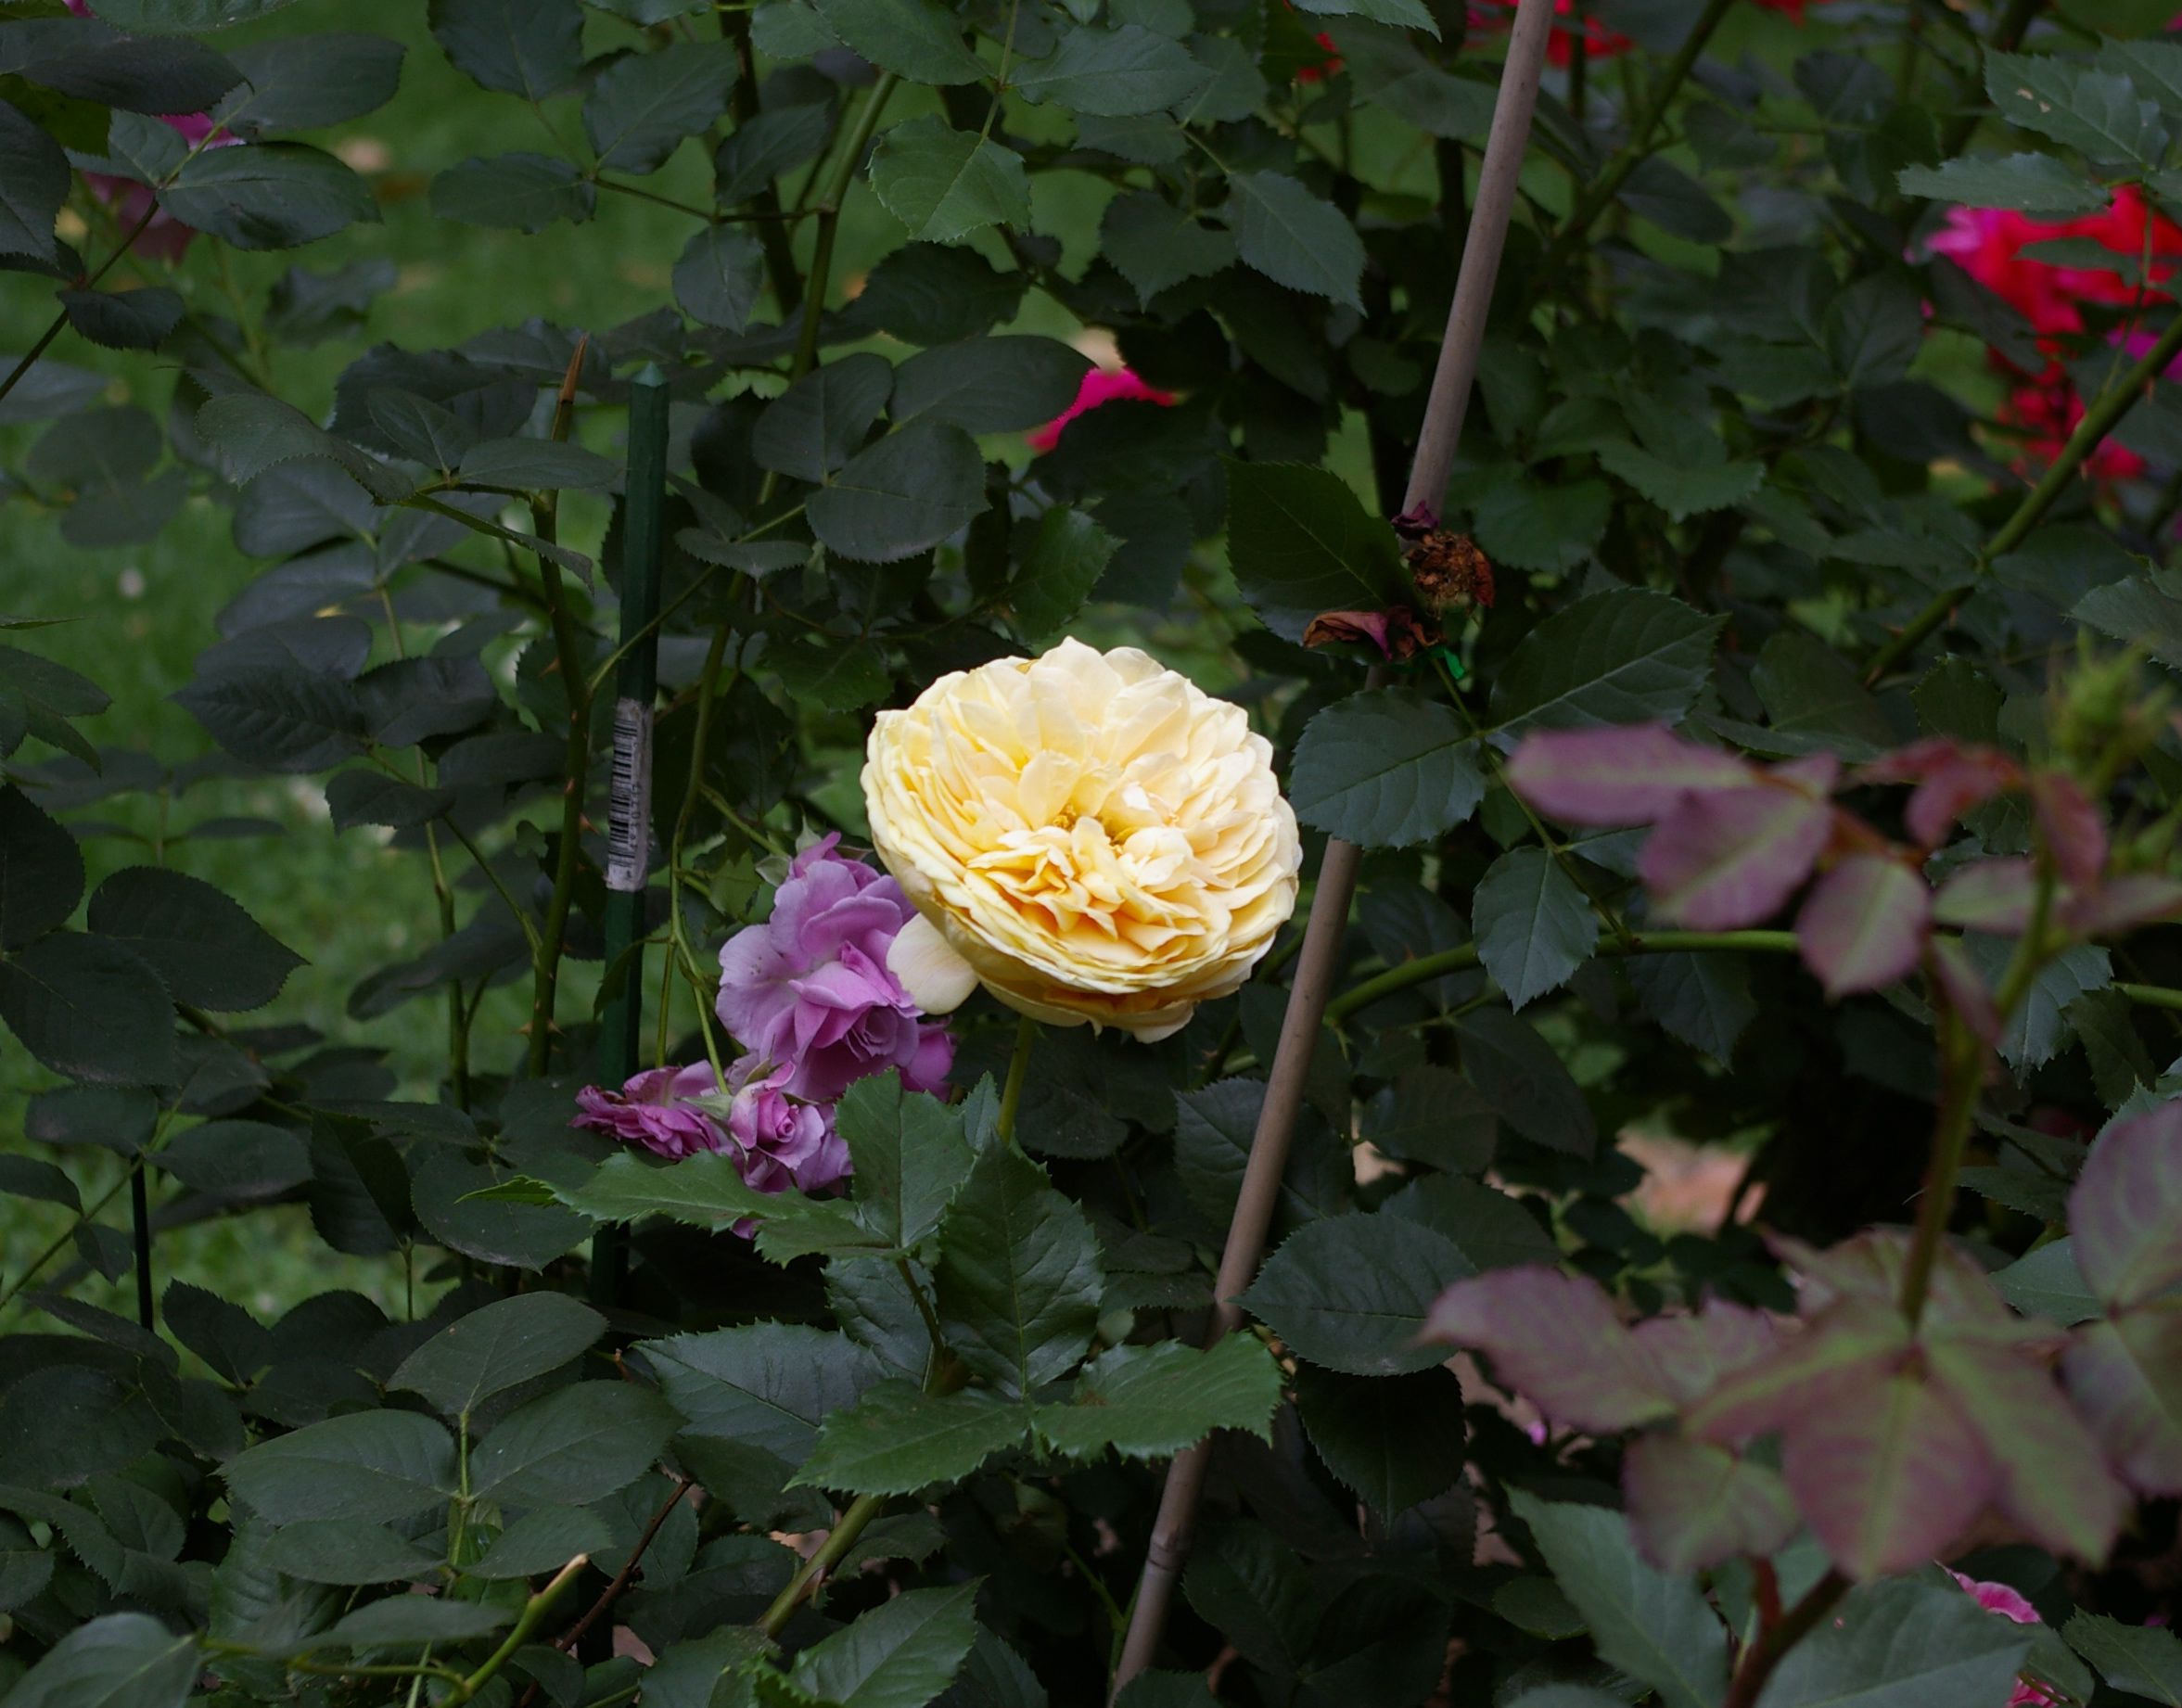 Another view of cream rose